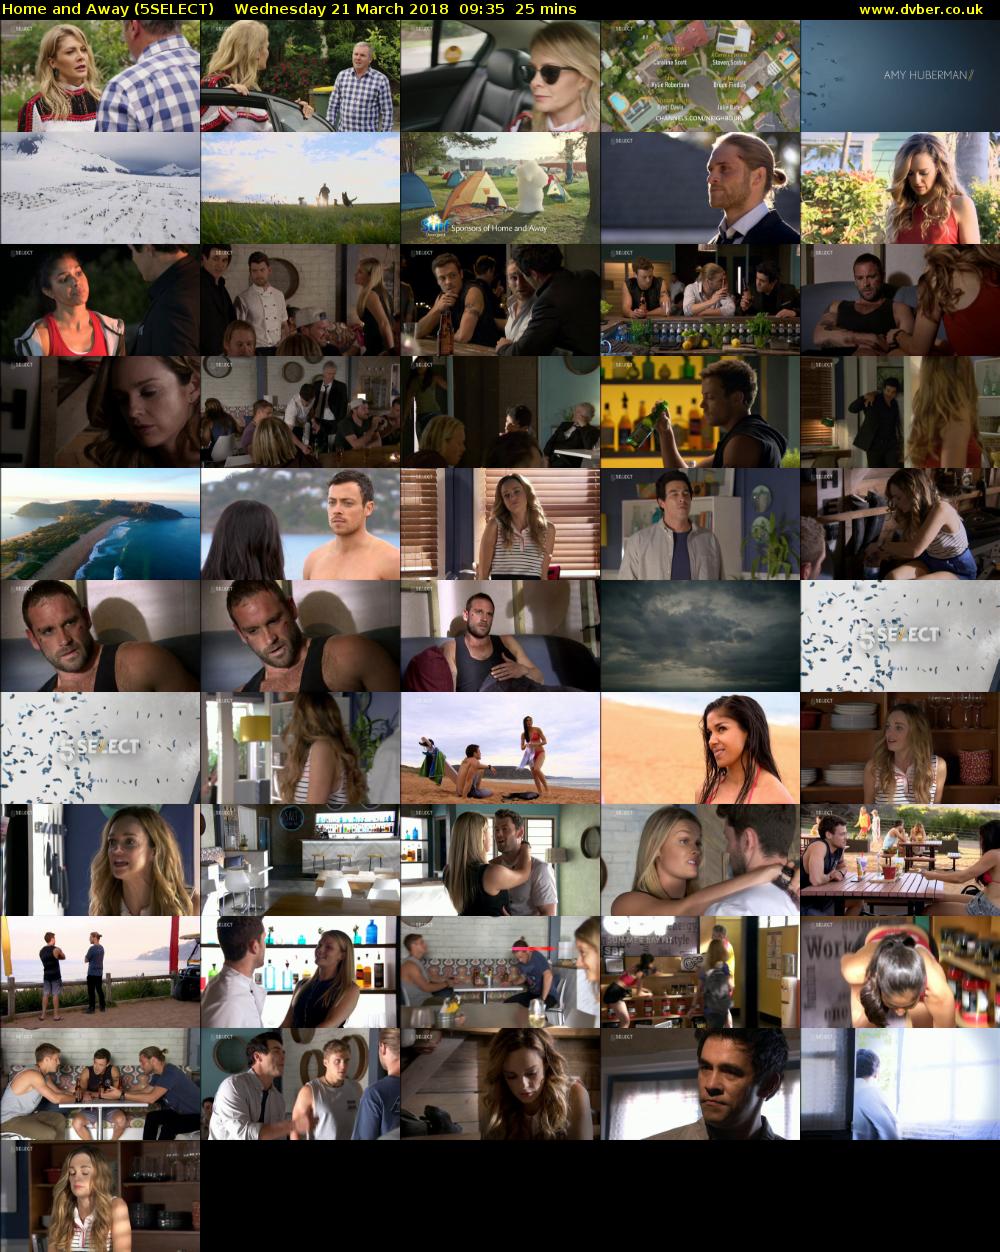 Home and Away (5SELECT) Wednesday 21 March 2018 09:35 - 10:00